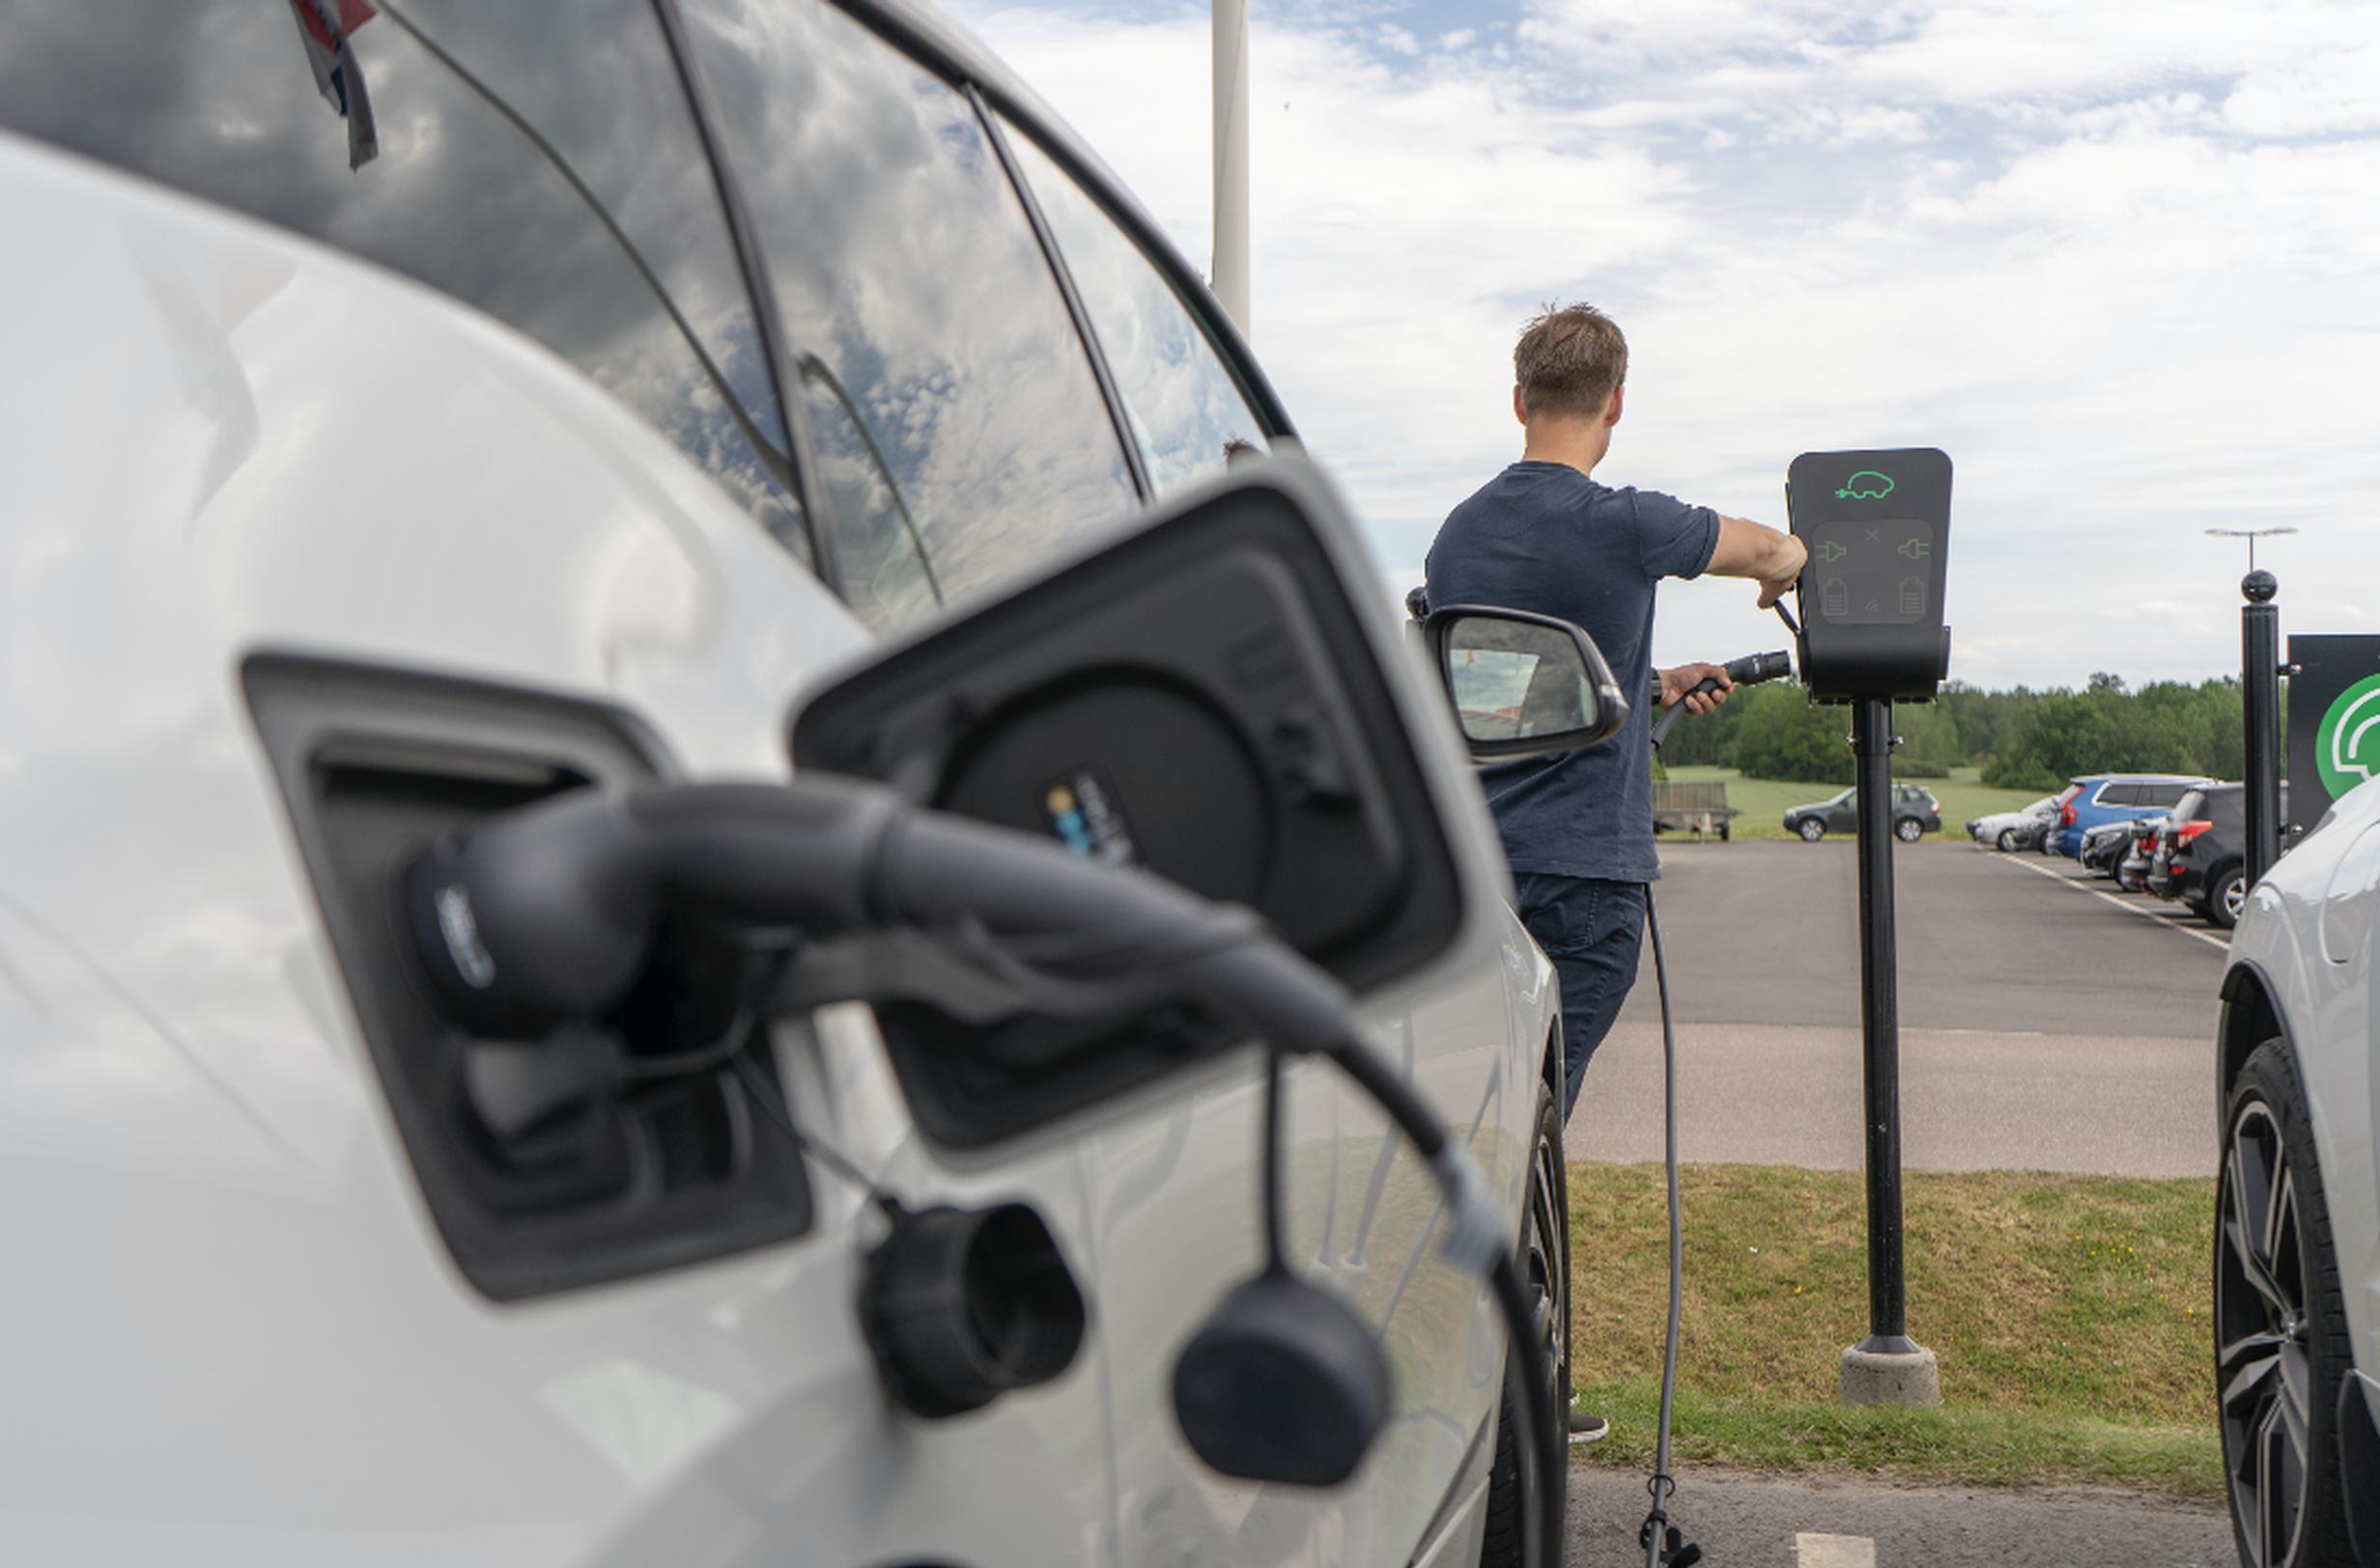 Only 56% of EV owners are now charging at home (down from 78% in 2021), with 20% charging at shopping centres, 20% at work, 11% at hotels and 8% at restaurants